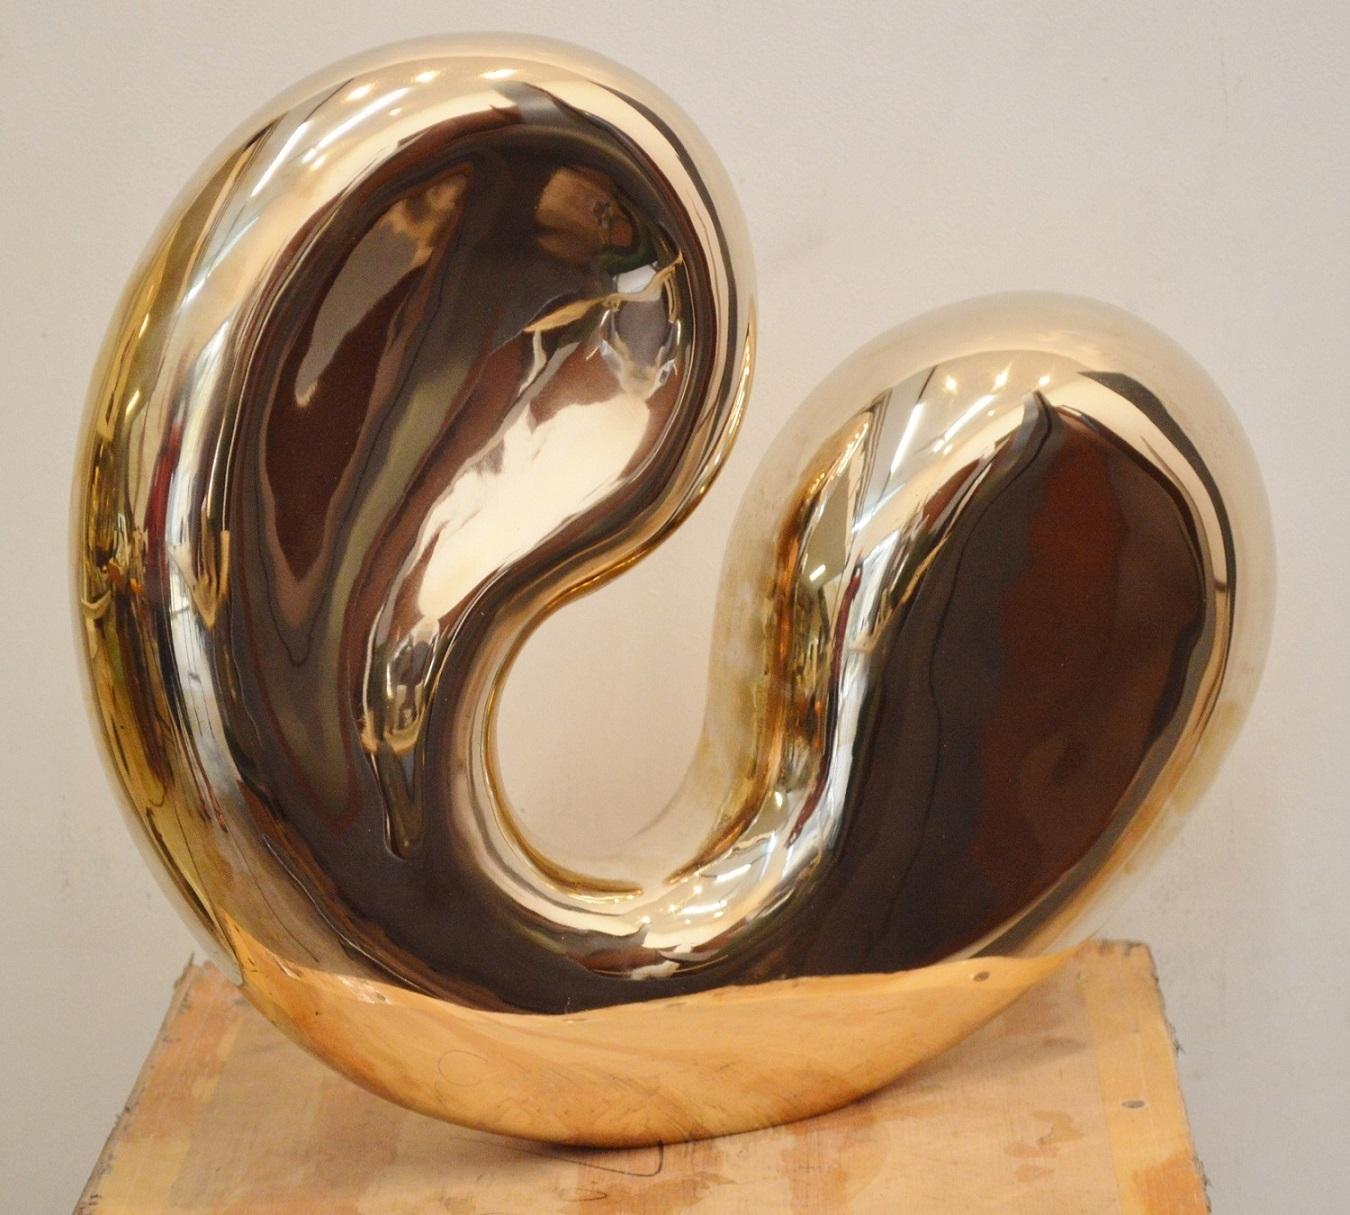 Steve Murphy Abstract Sculpture - It's Happened Again